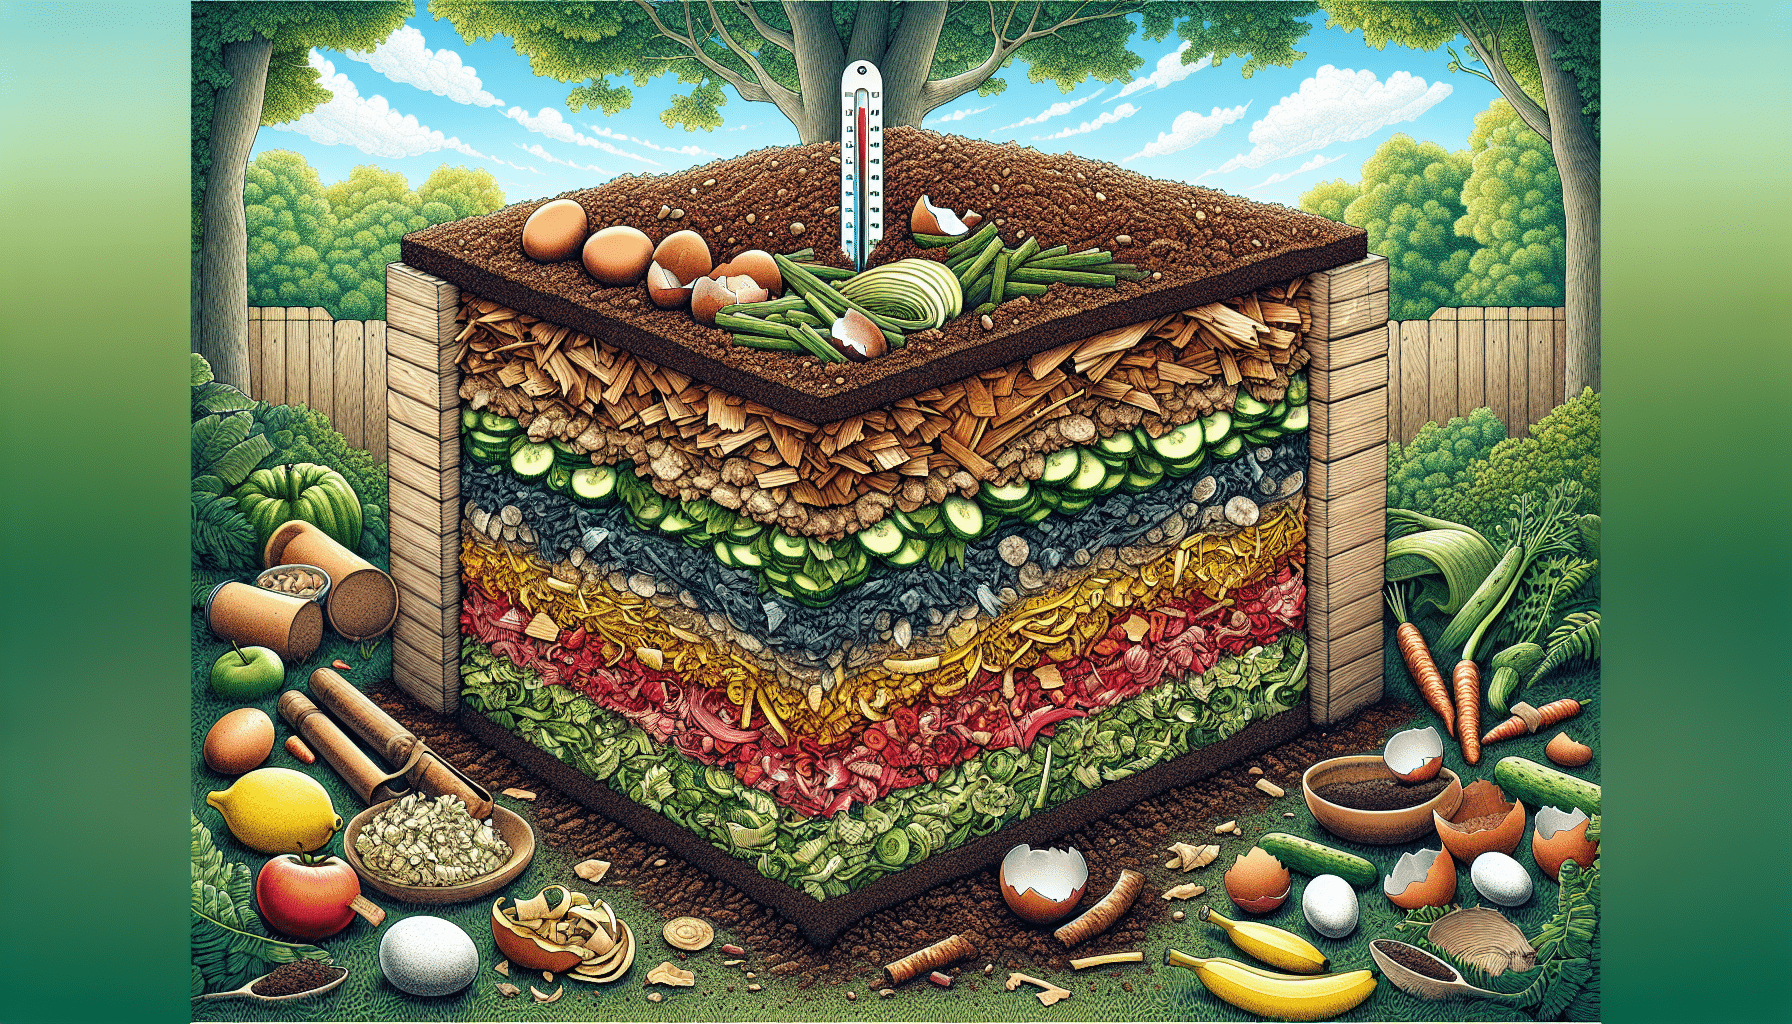 Essentials for a DIY Compost Pile - illustration of a compost pile